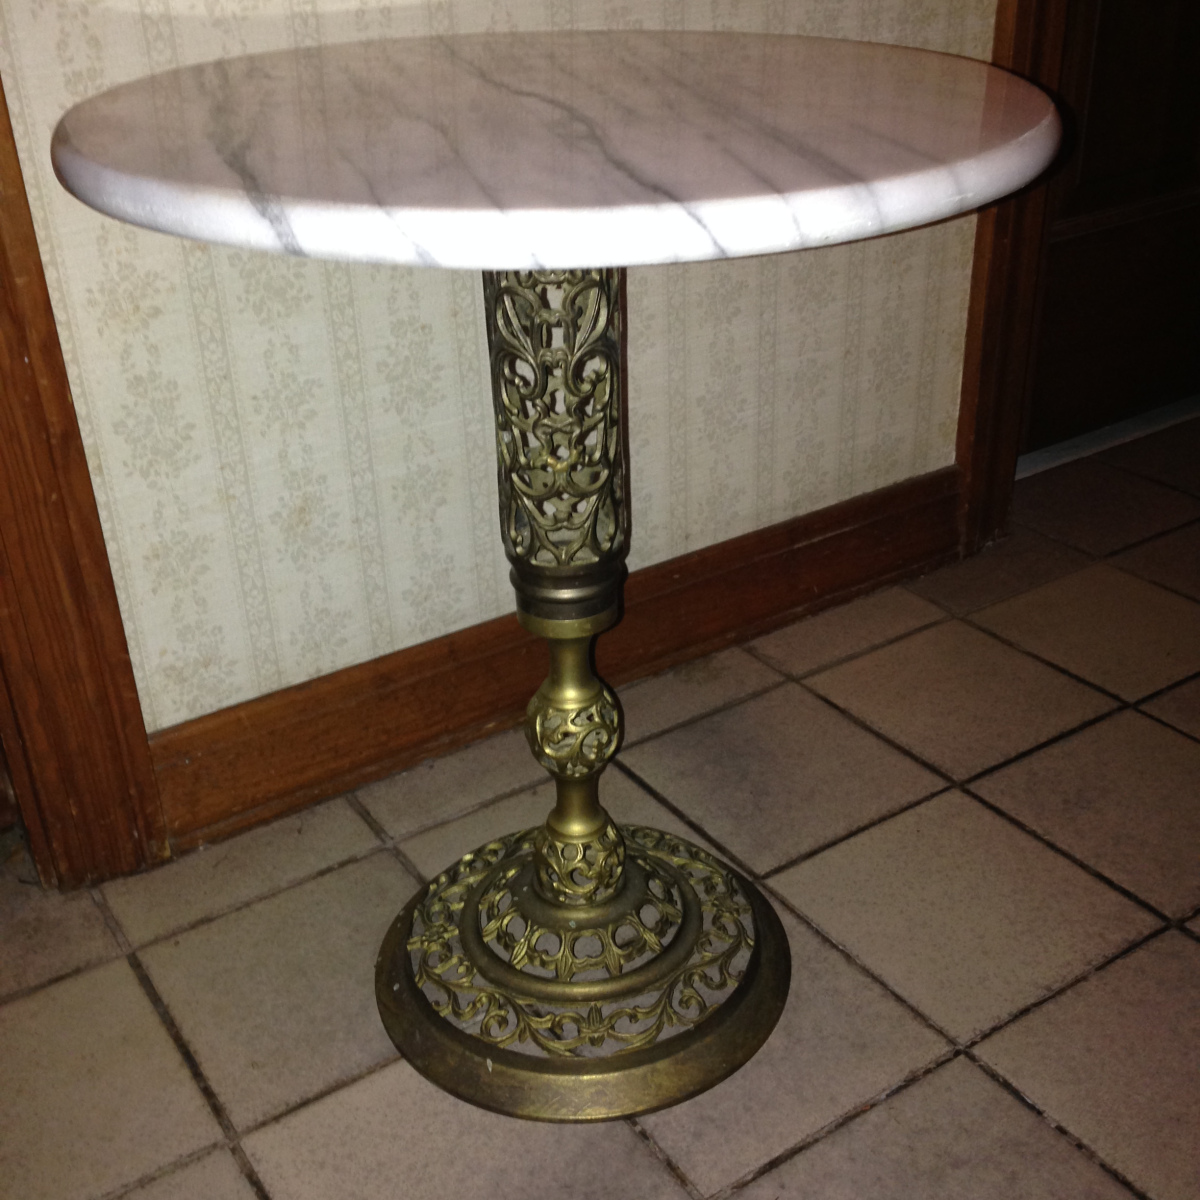 sold vintage round marble top table with ornate brass hallway accent bistro white counter height set timberline furniture bar storage black and glass coffee cube end valley side